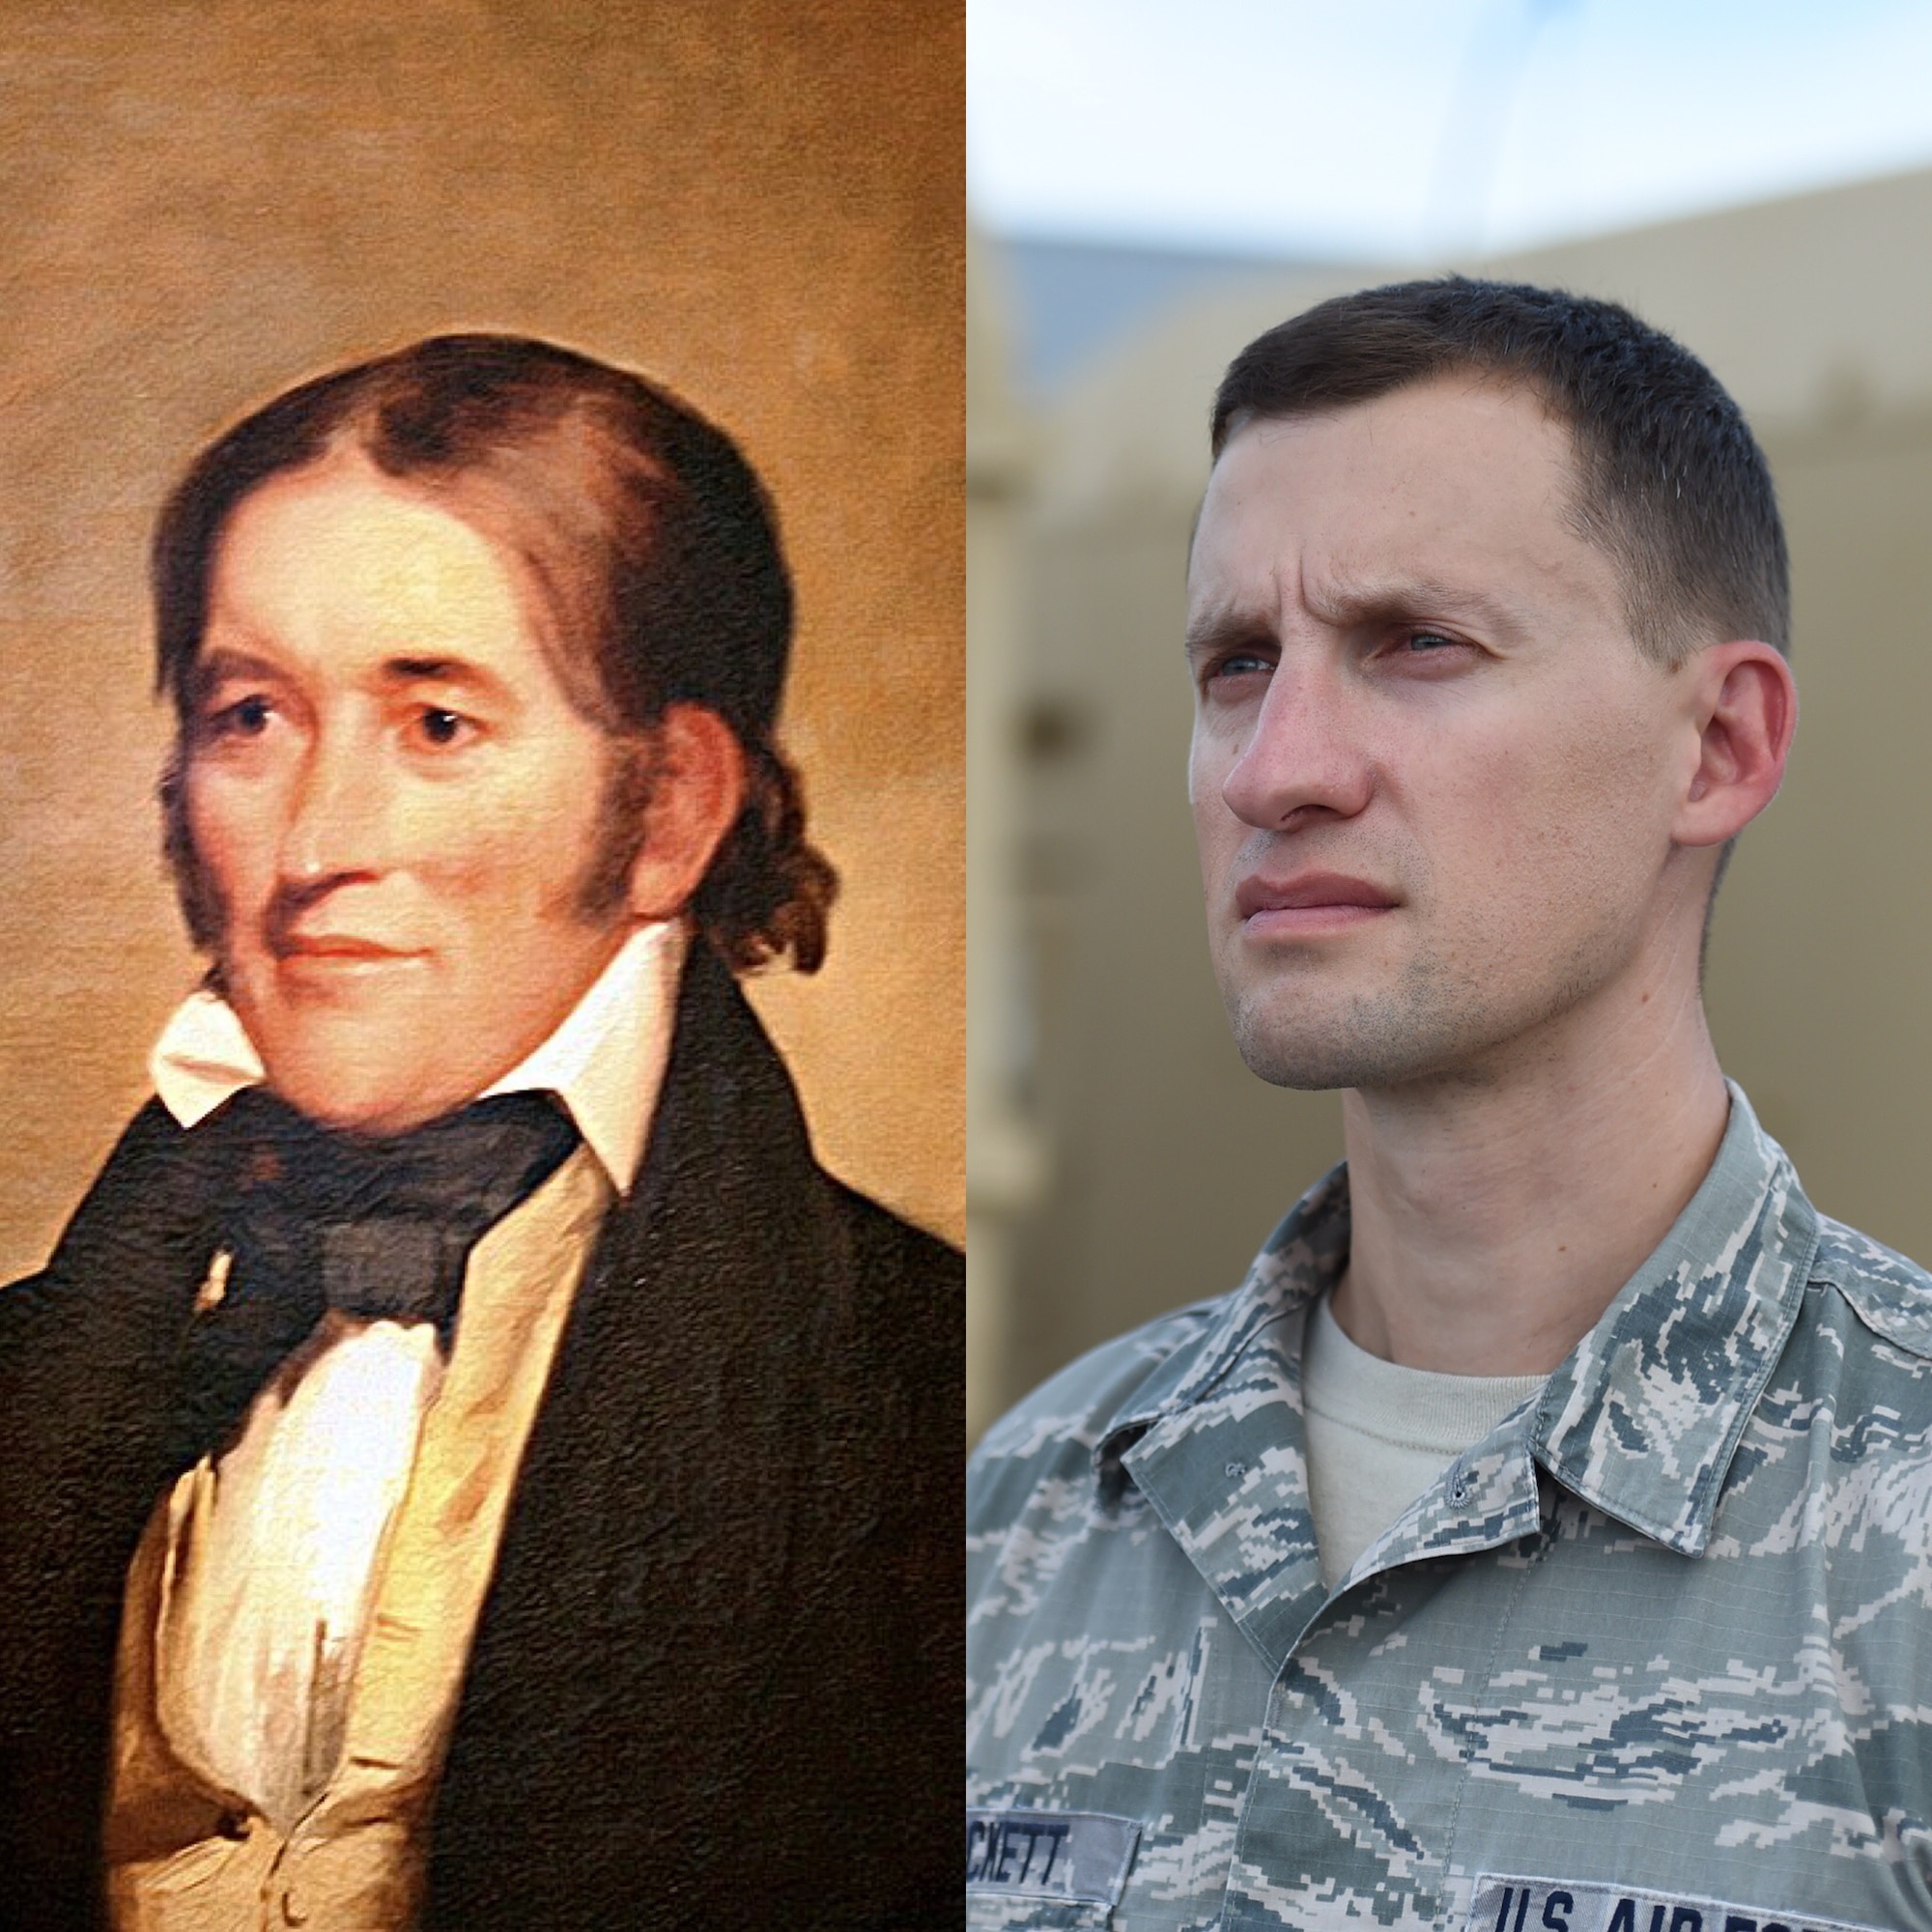 U.S. Air National Guard Master Sgt. Davy Crockett, 132d Medical Group laboratory NCOIC, shares a resemblance with his ancestor Davy Crockett's 1834 painting by Chester Harding. (U.S. Air National Guard illustration by Staff Sgt. Michael J. Kelly, Courtesy image by Cliff1066)